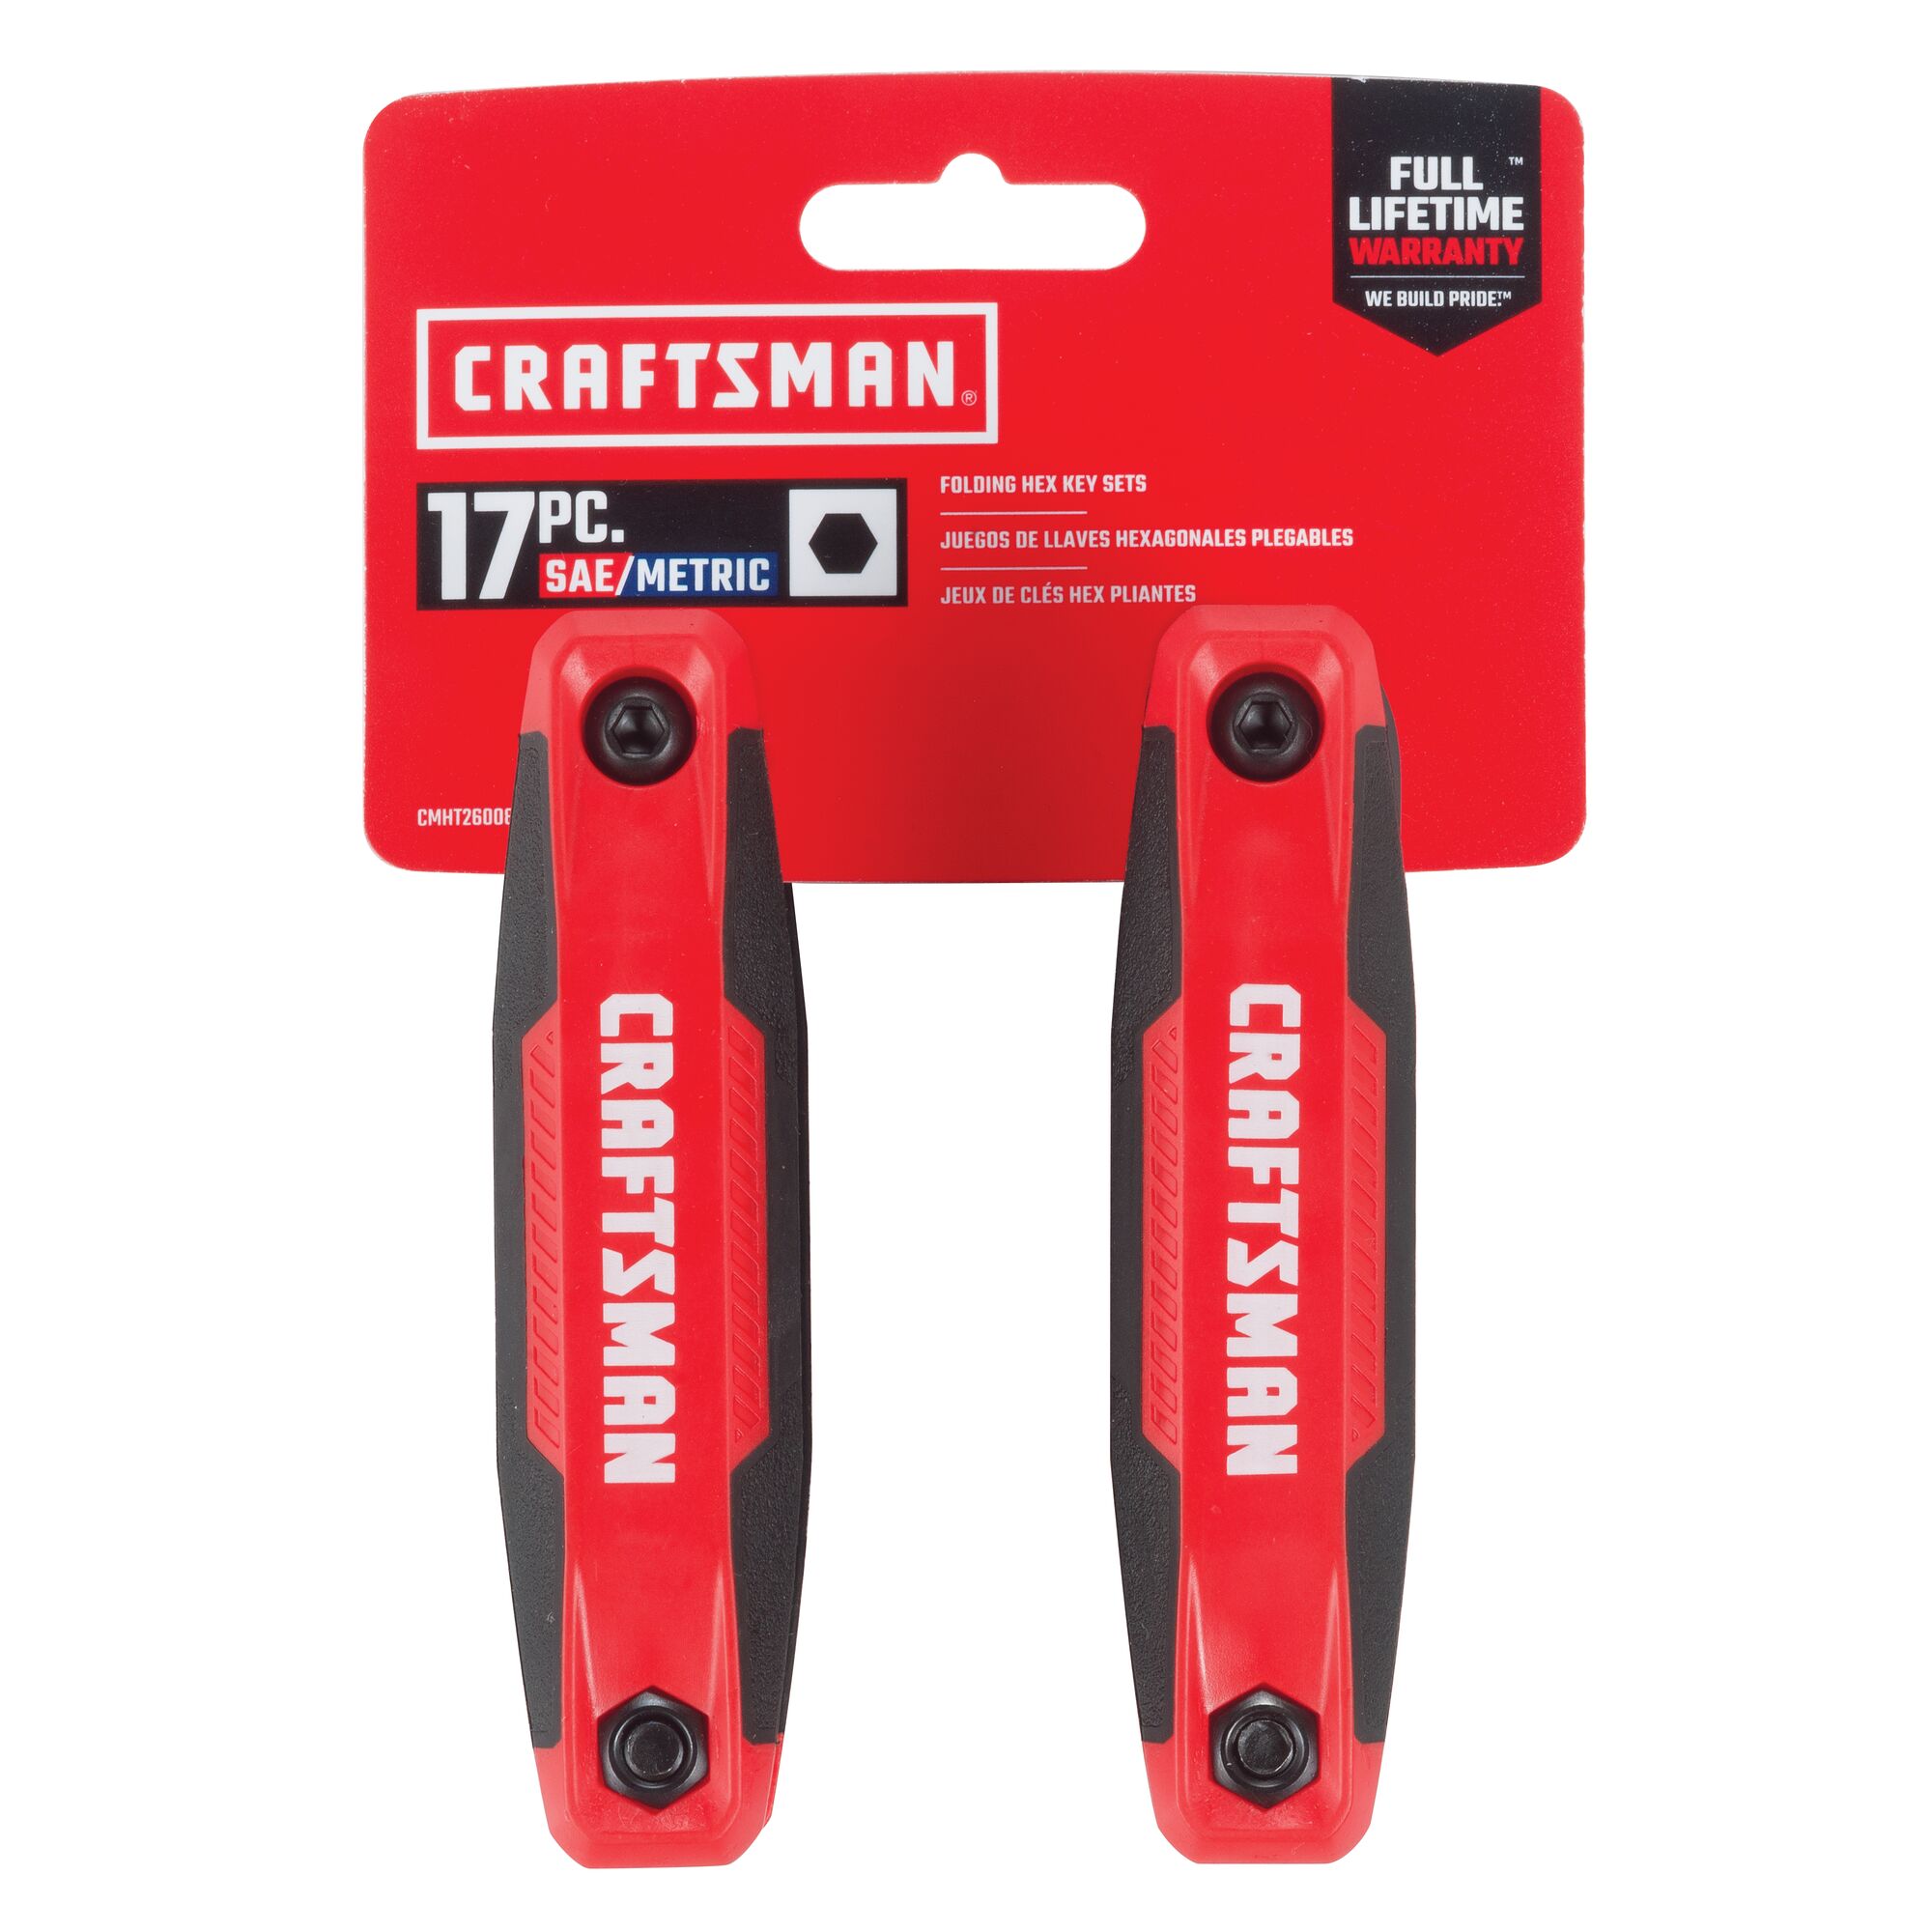 Craftsman 17 piece folding hex wrench sets in plastic packaging.